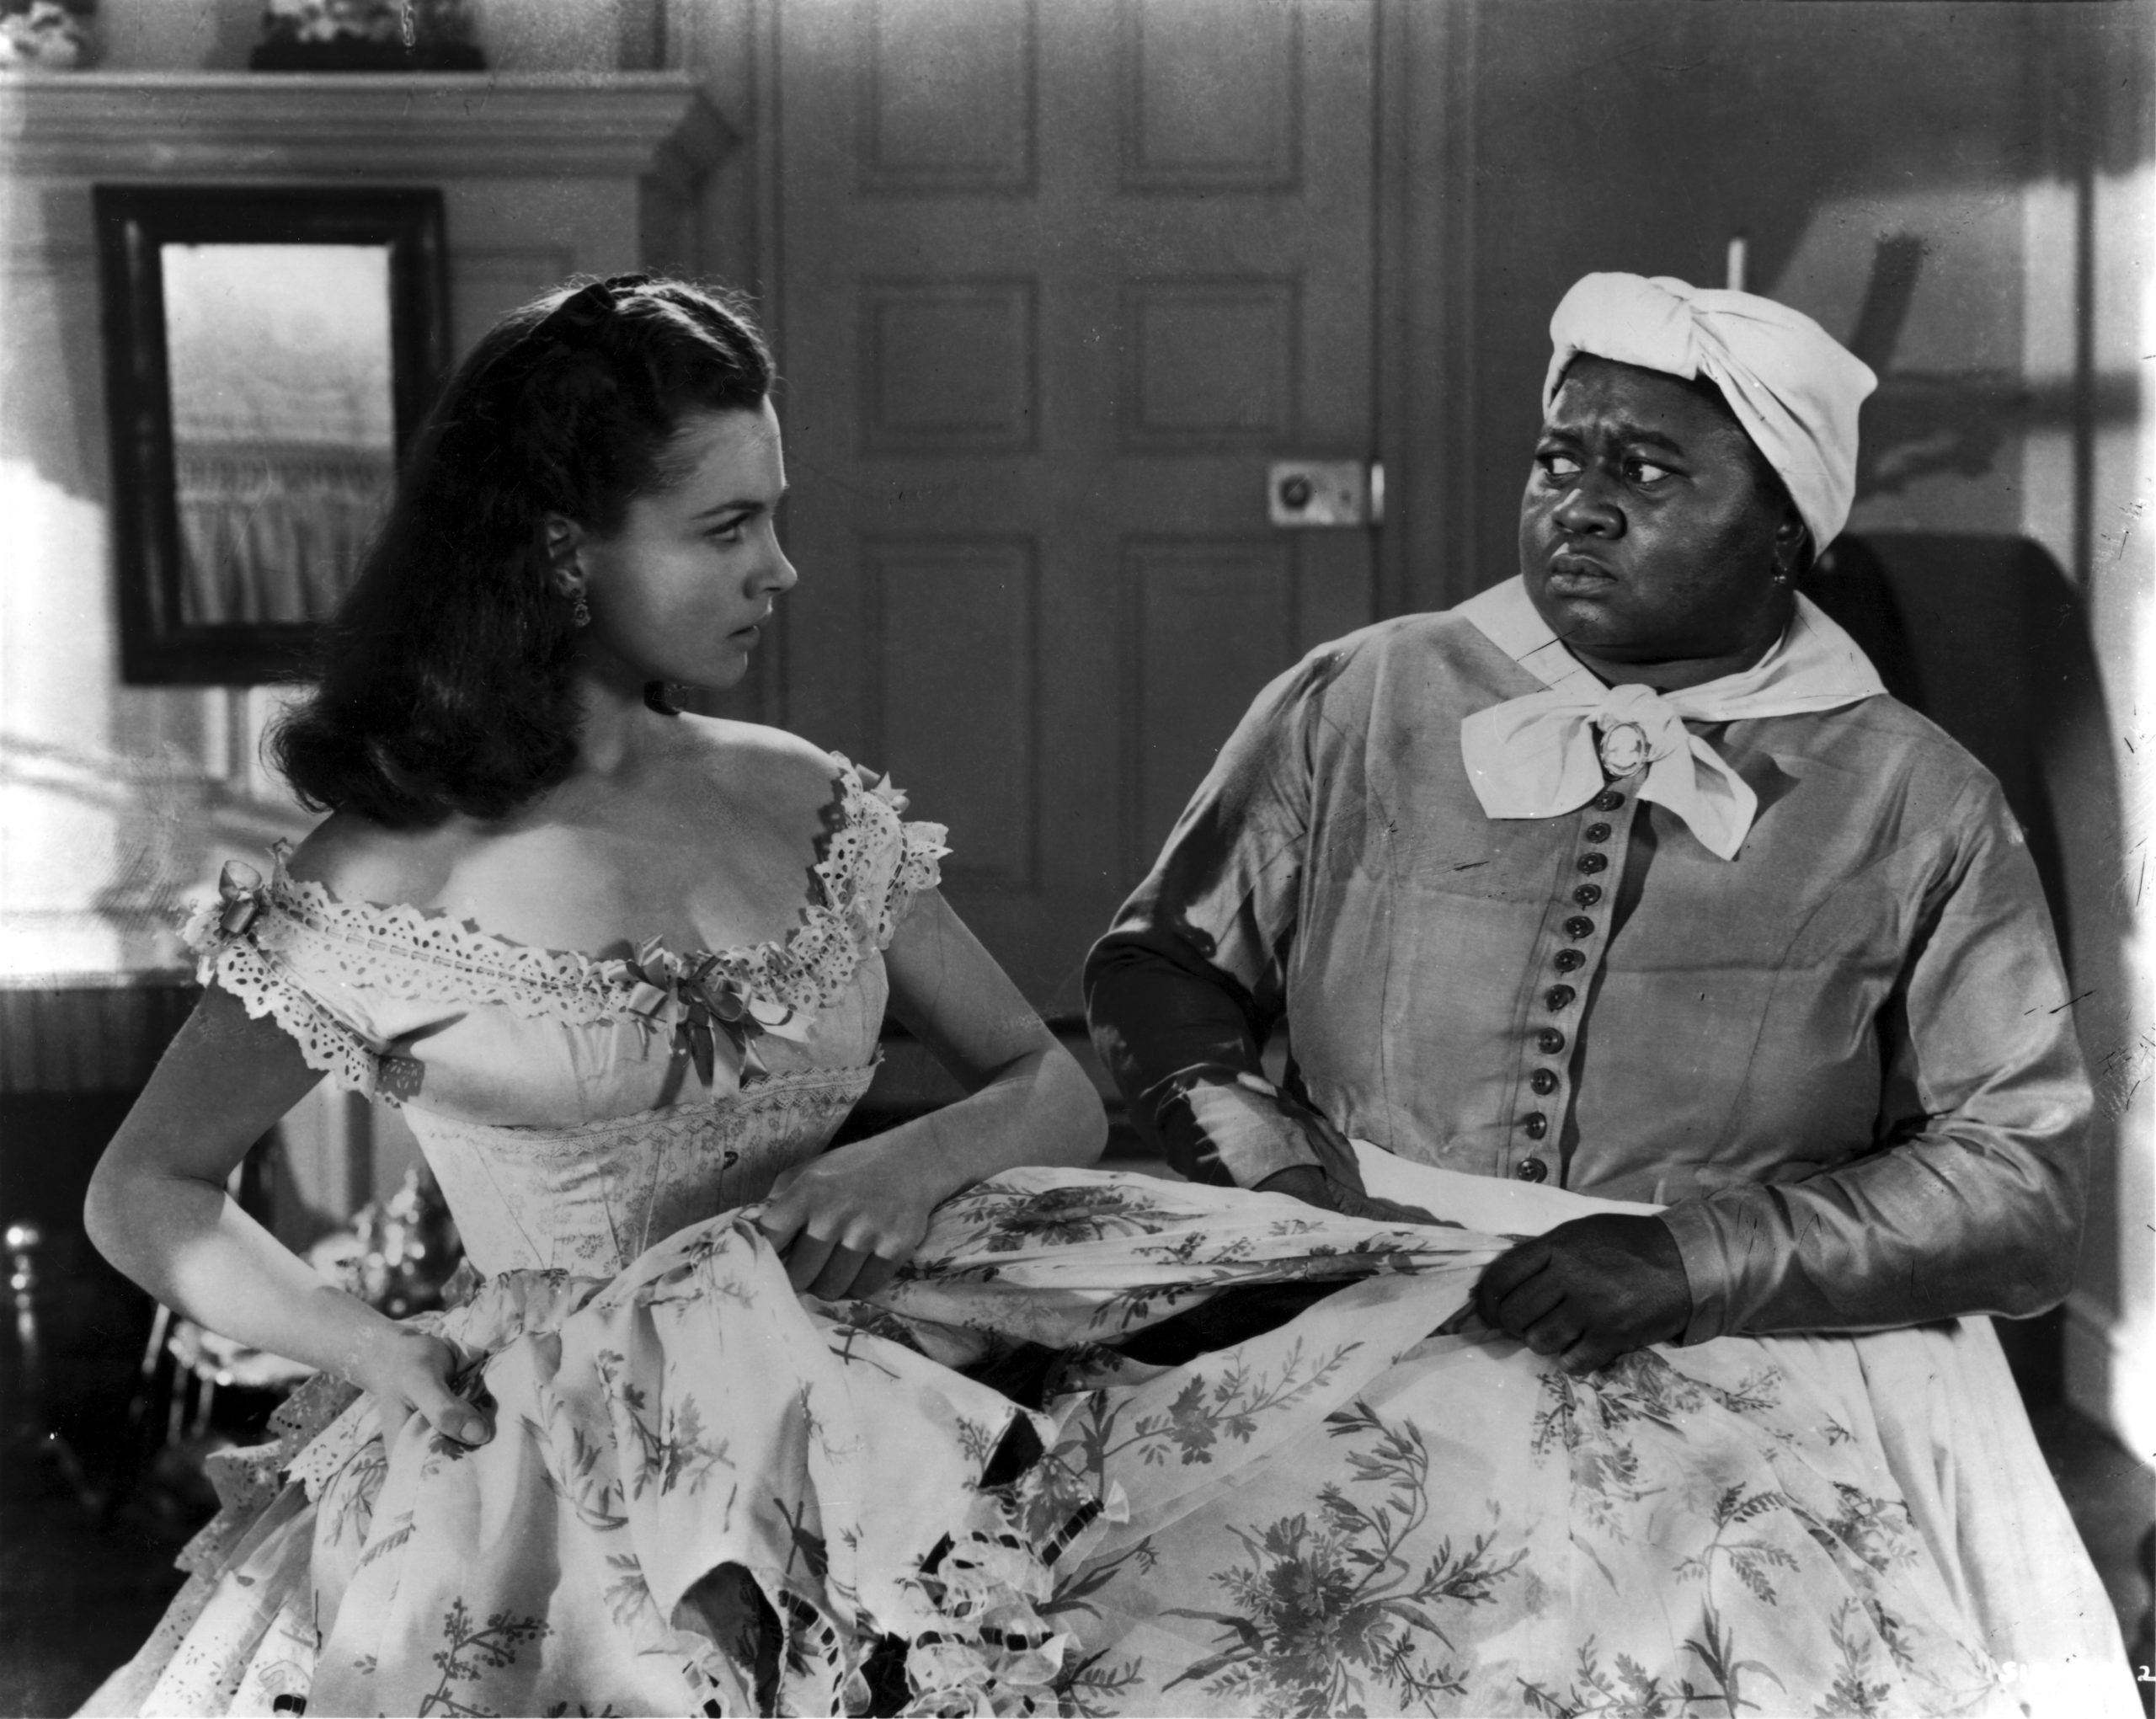 Black and white still image from "Gone with the Wind" featuring Scarlett O'Hara and Mammy